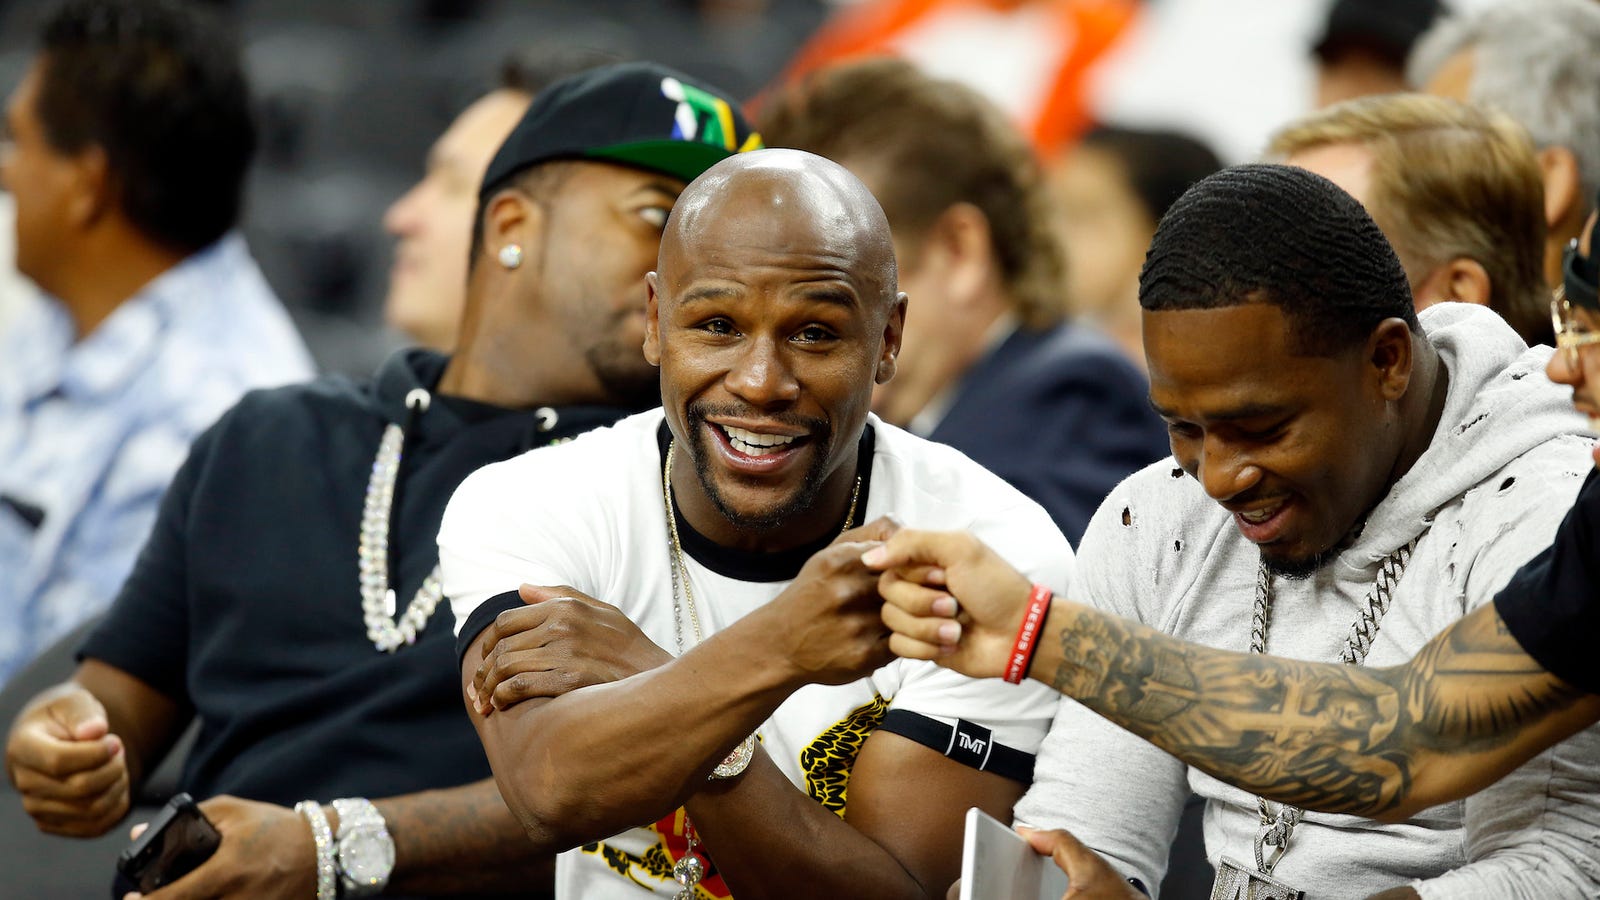 Floyd Mayweather Is Still Using The Same Old Domestic Violence Excuses